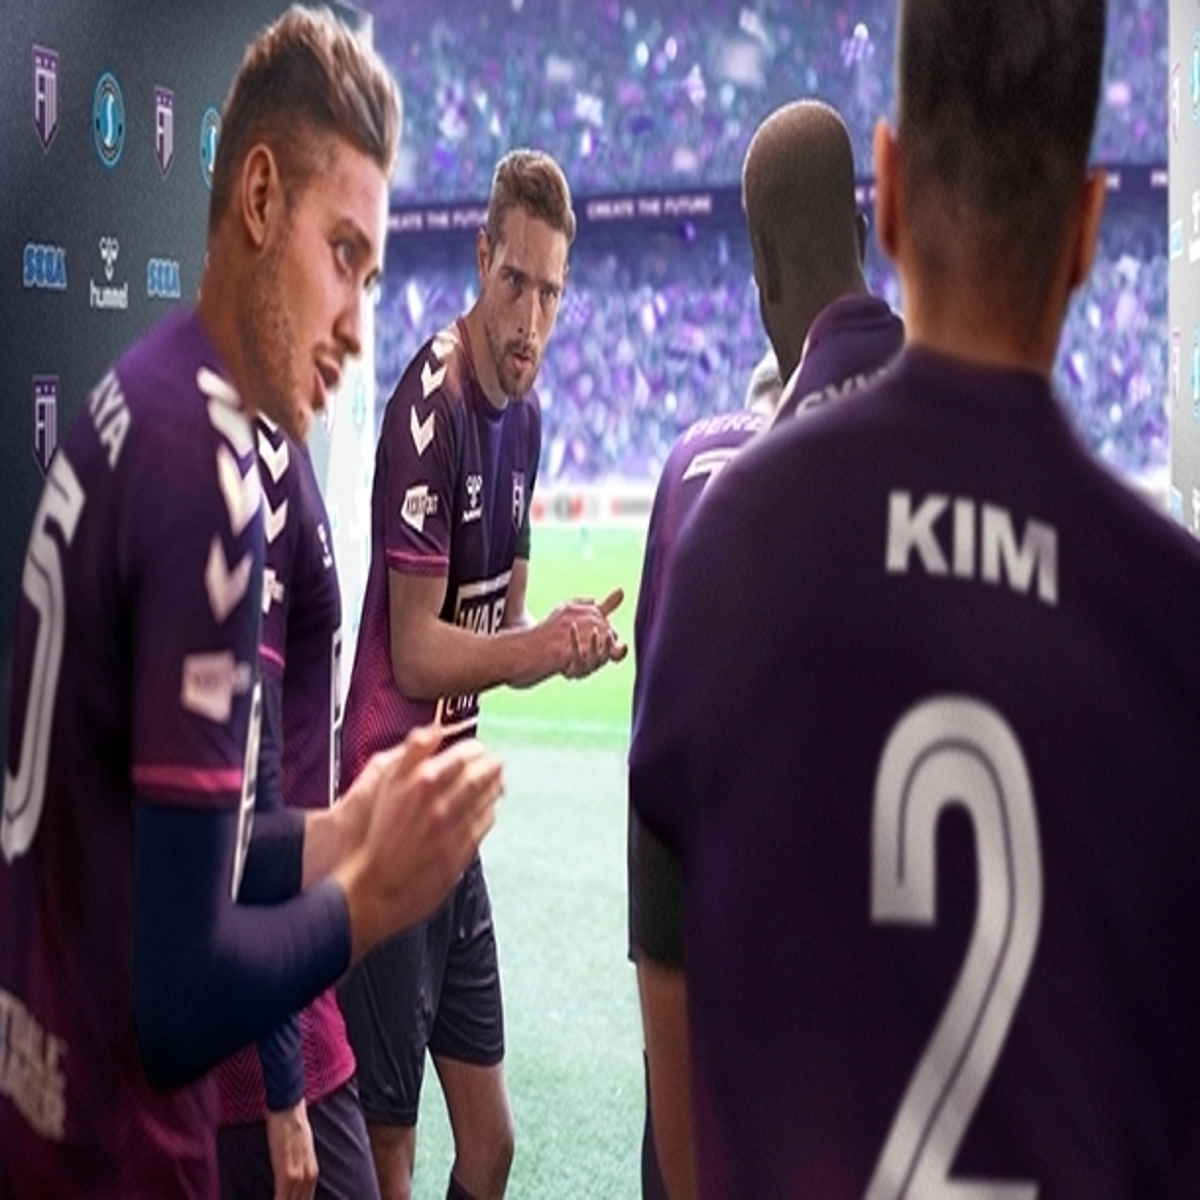 Football Manager 2022 wonderkids: The 20 best young players to